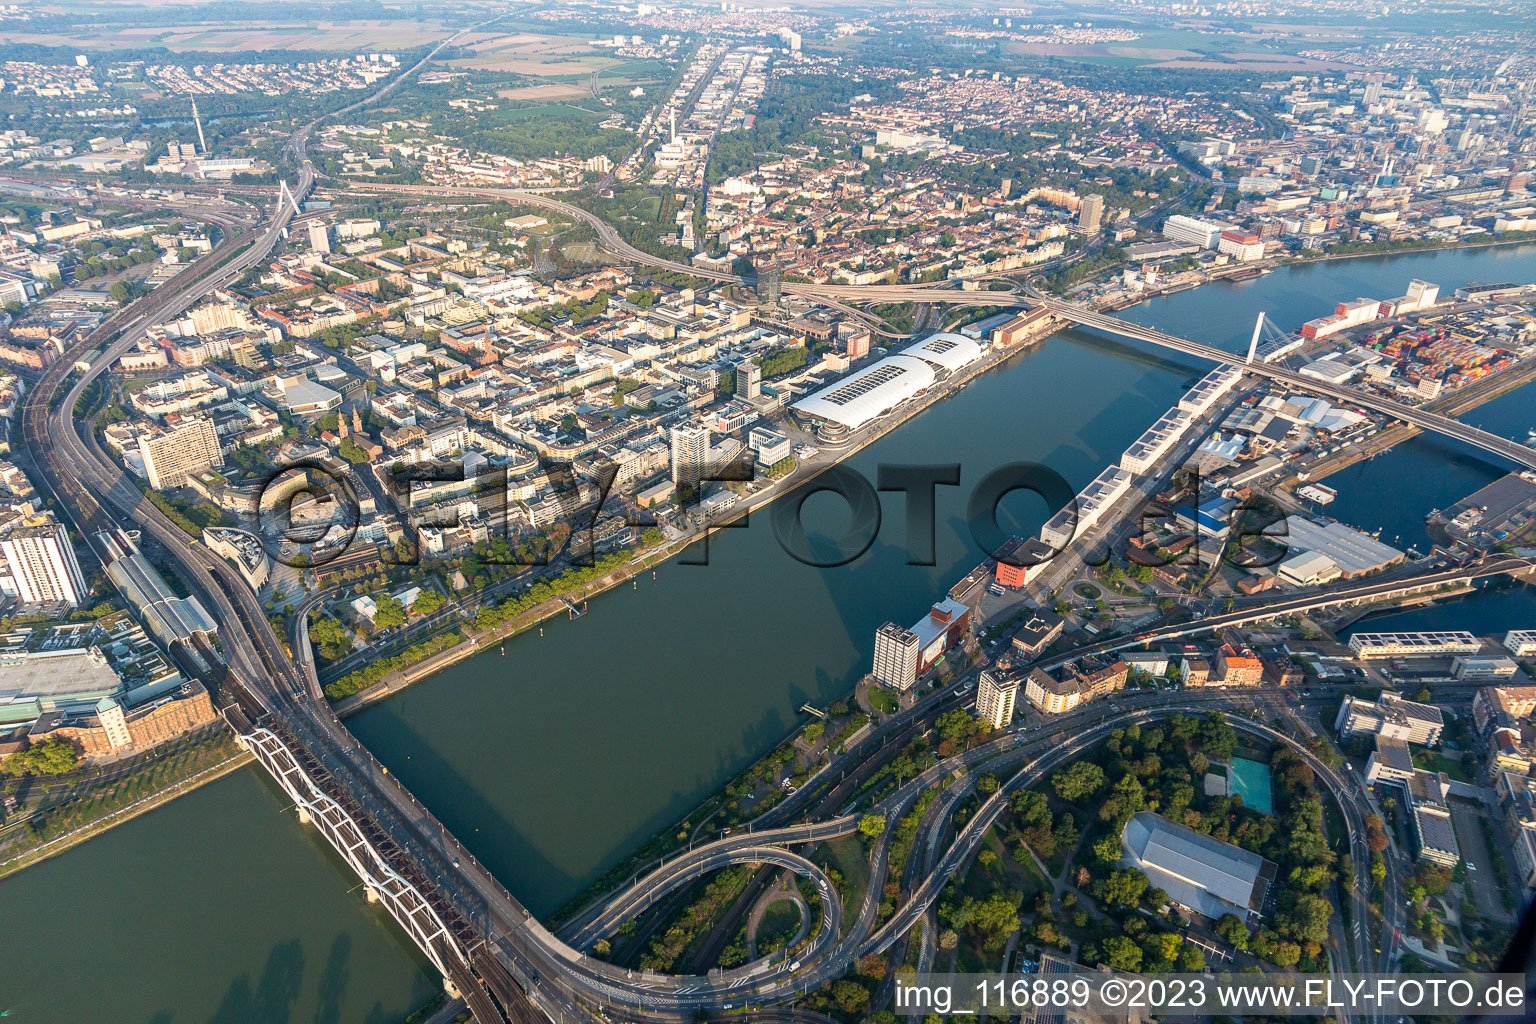 Aerial view of Construction to renovation work on the to be reconstructed road bridges between Mannheim and Ludwigshafen in Ludwigshafen am Rhein in the state Rhineland-Palatinate, Germany